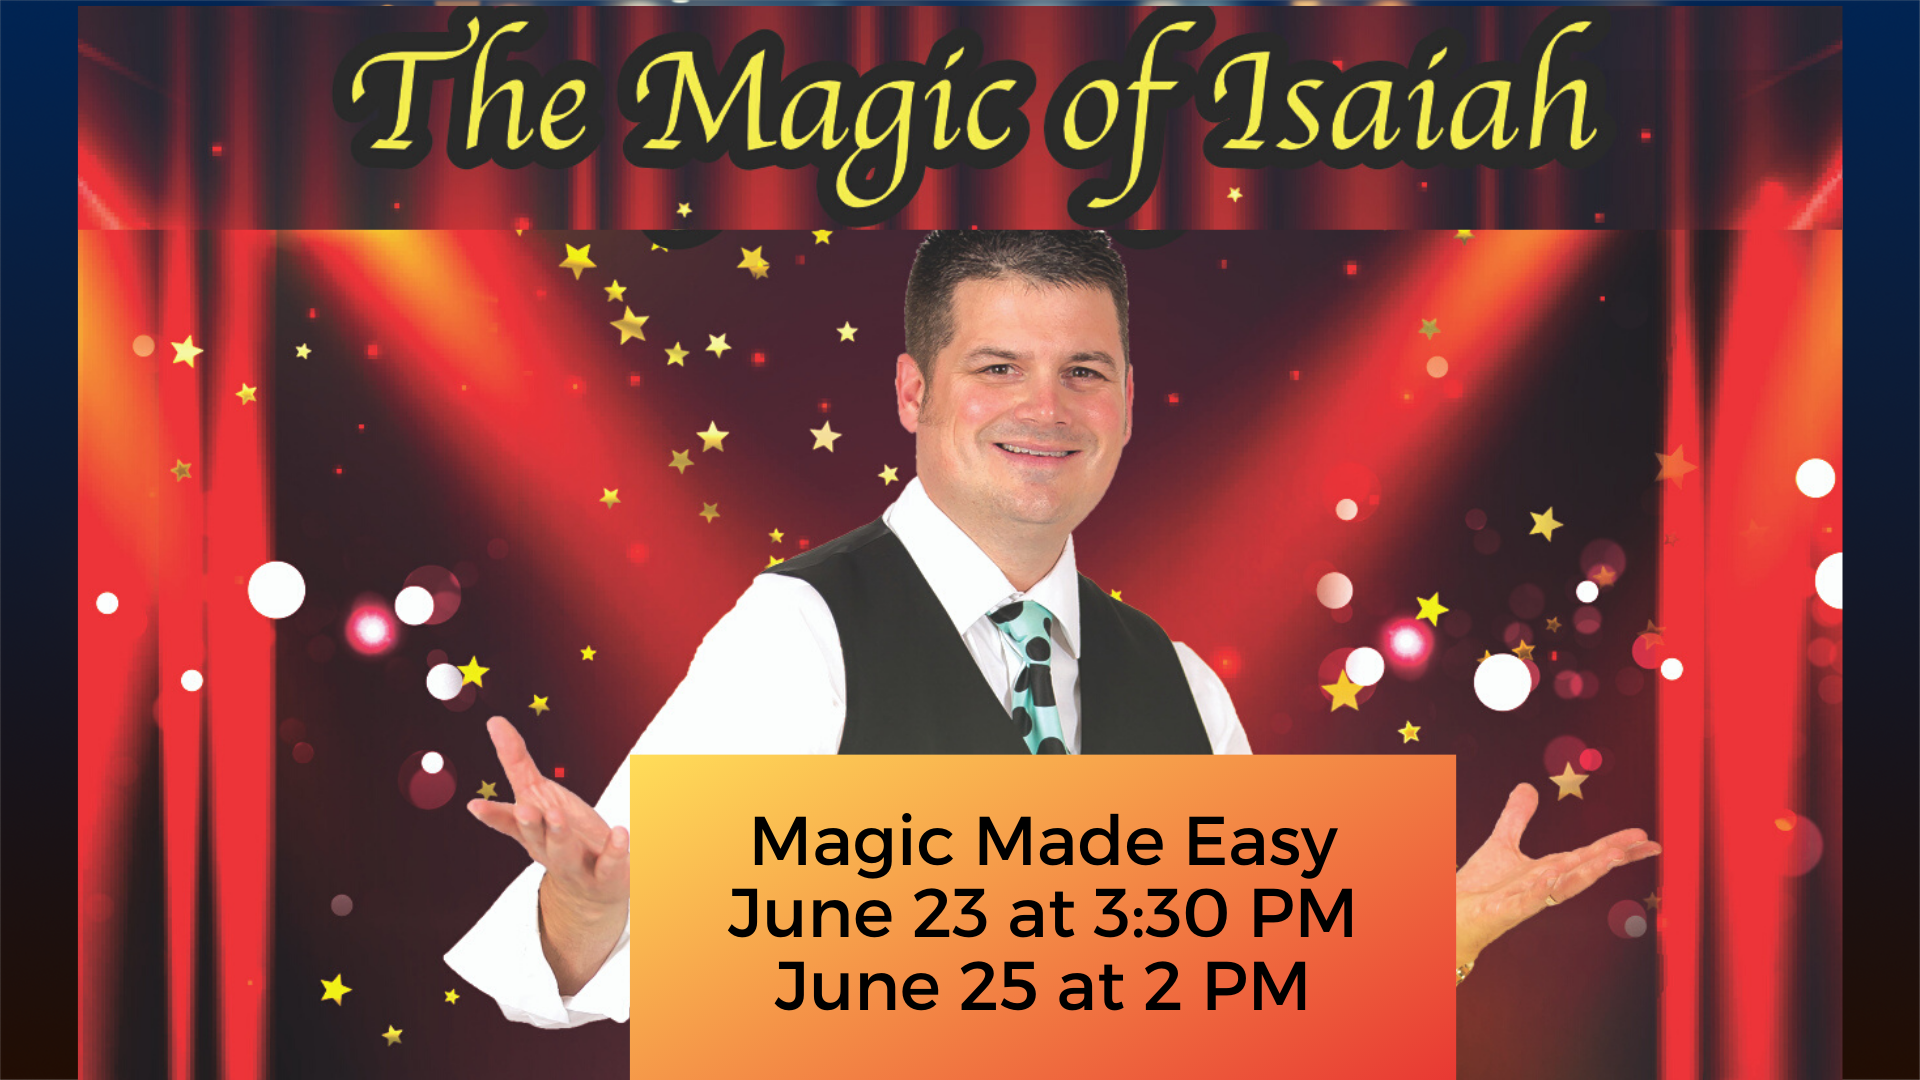 Magic Made Easy. Isaiah, the magician, is standing in front of a red curtain. 